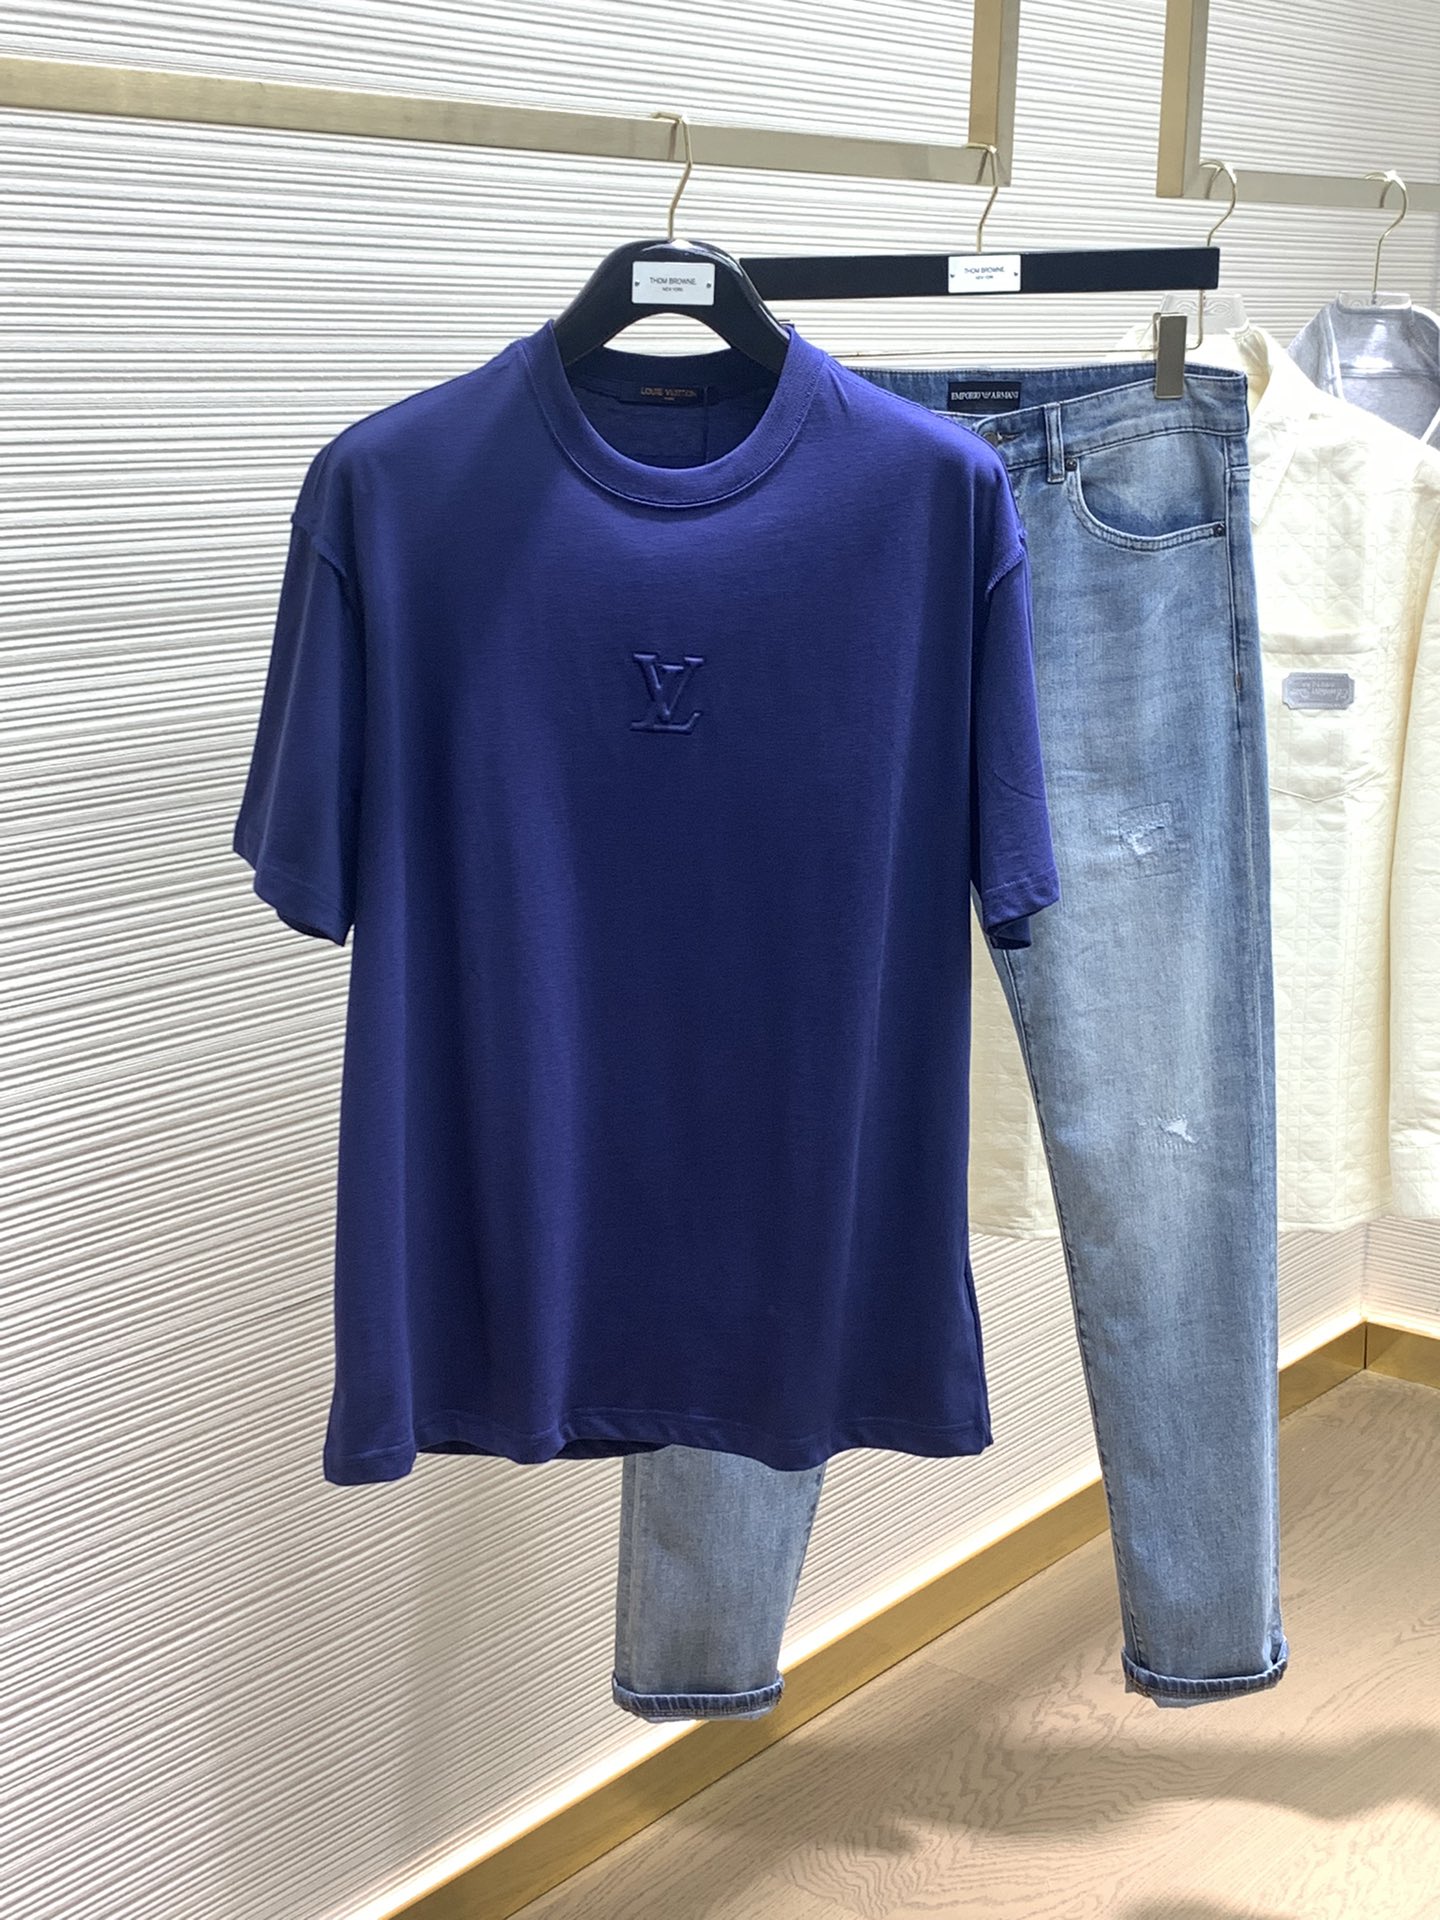 Louis Vuitton Clothing T-Shirt Spring Collection Fashion Short Sleeve